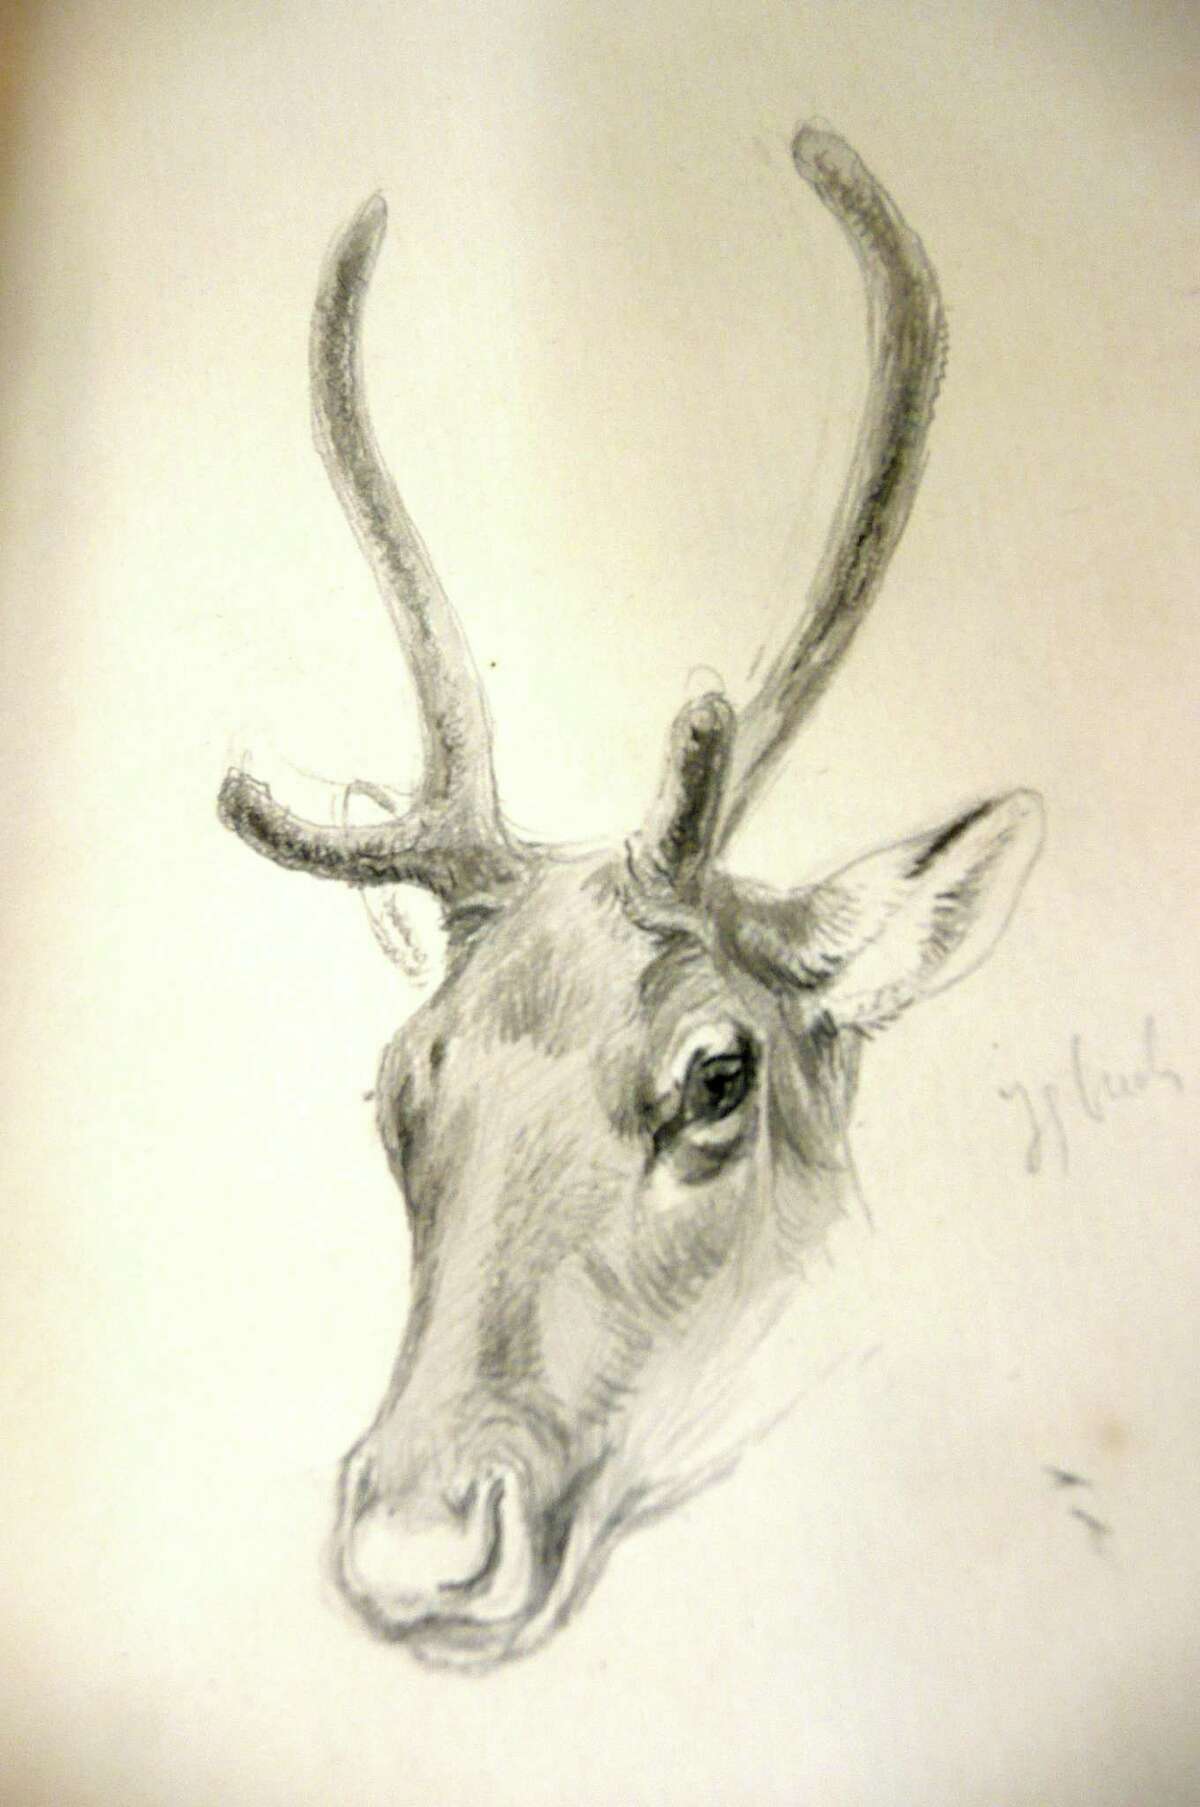 Among the illustrations in the journals of artists/naturalist Ernest Thompson Seton is this fine study of a young buck deer. His self-taught skills as a naturalist artist resulted in many illustrated animal story books for children.